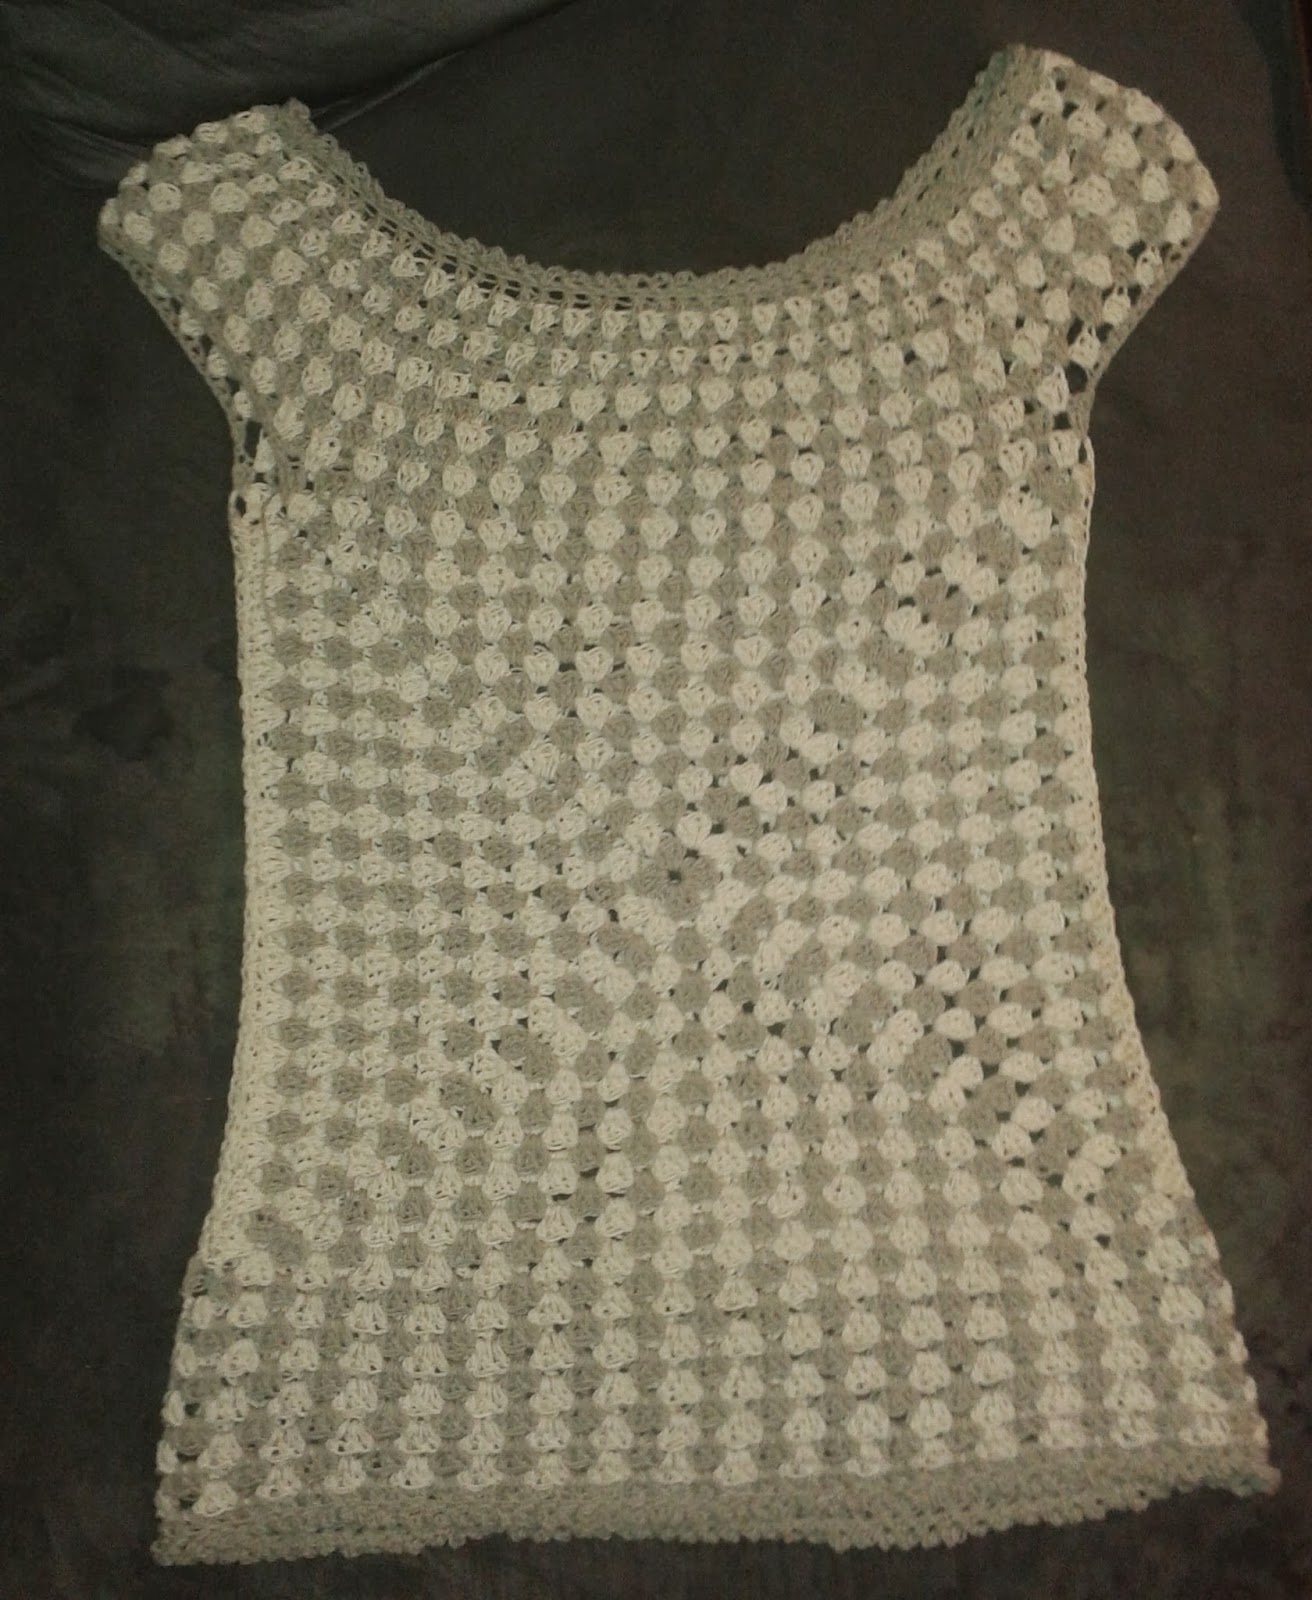 G-Squared Boat Neck Top Free Crochet Pattern